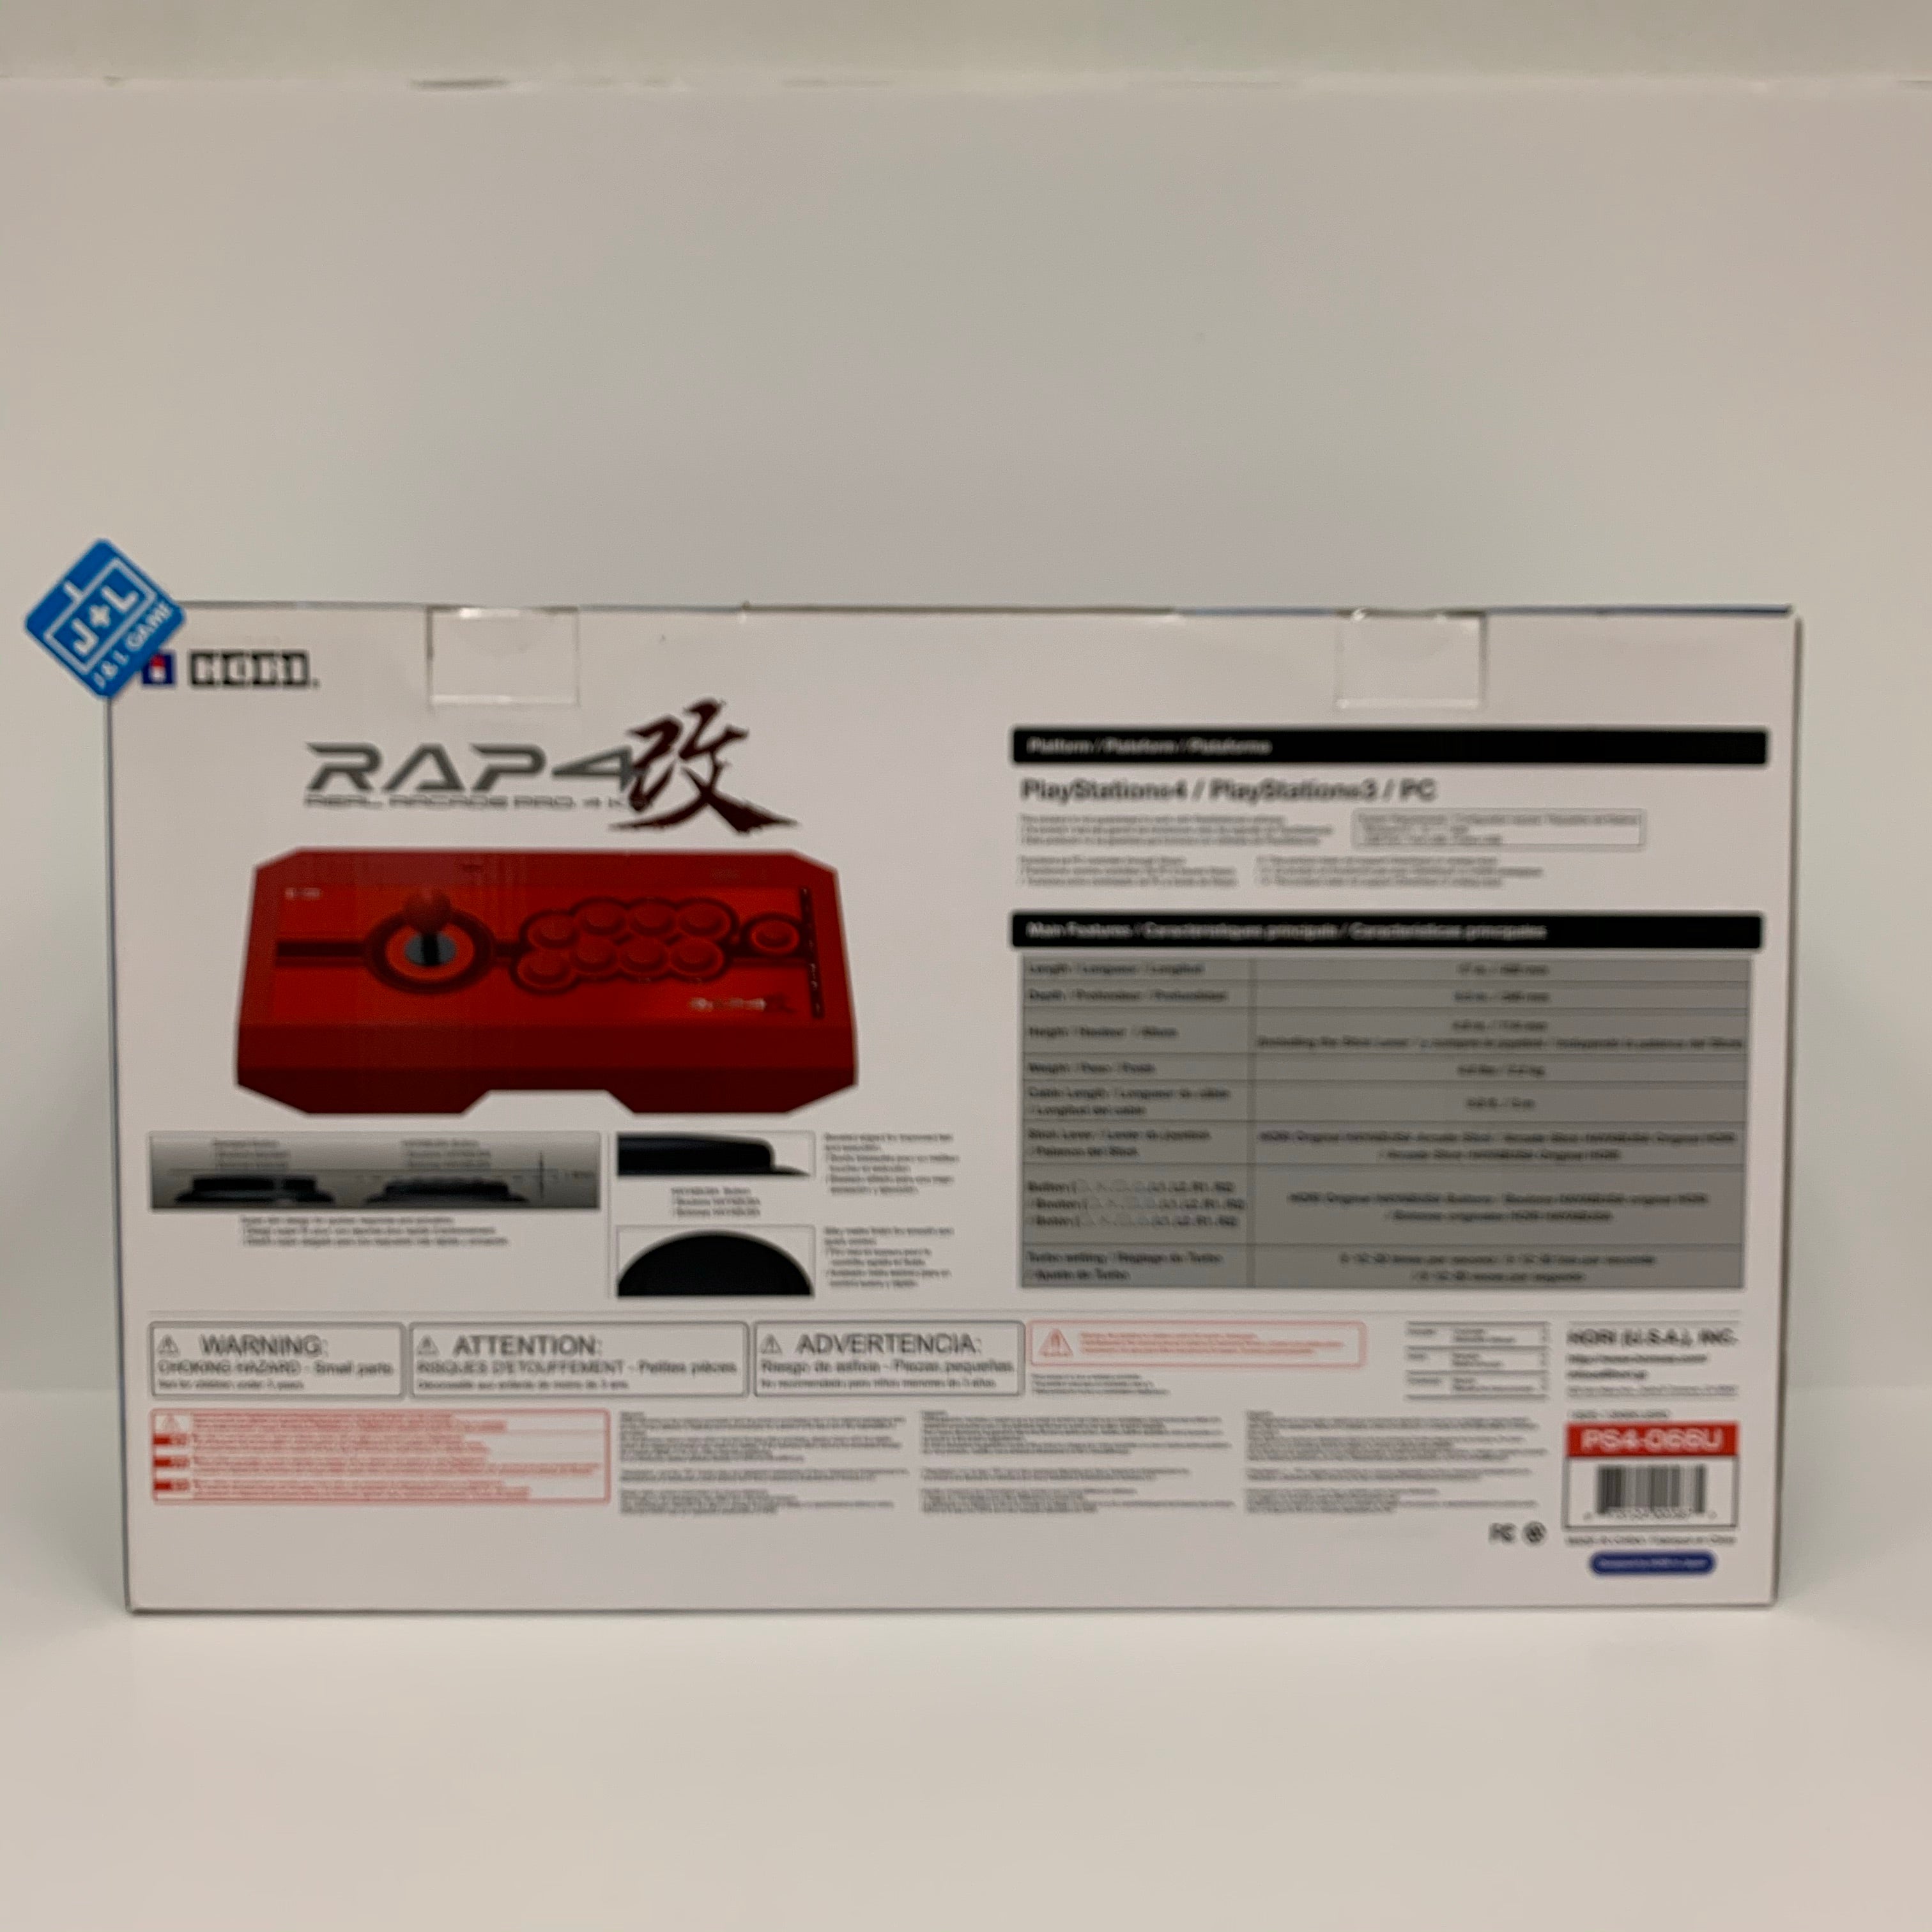 HORI Real Arcade Pro 4 Kai (Red) for PlayStation 4, PlayStation 3, and PC - (PS4) PlayStation 4 Accessories HORI   